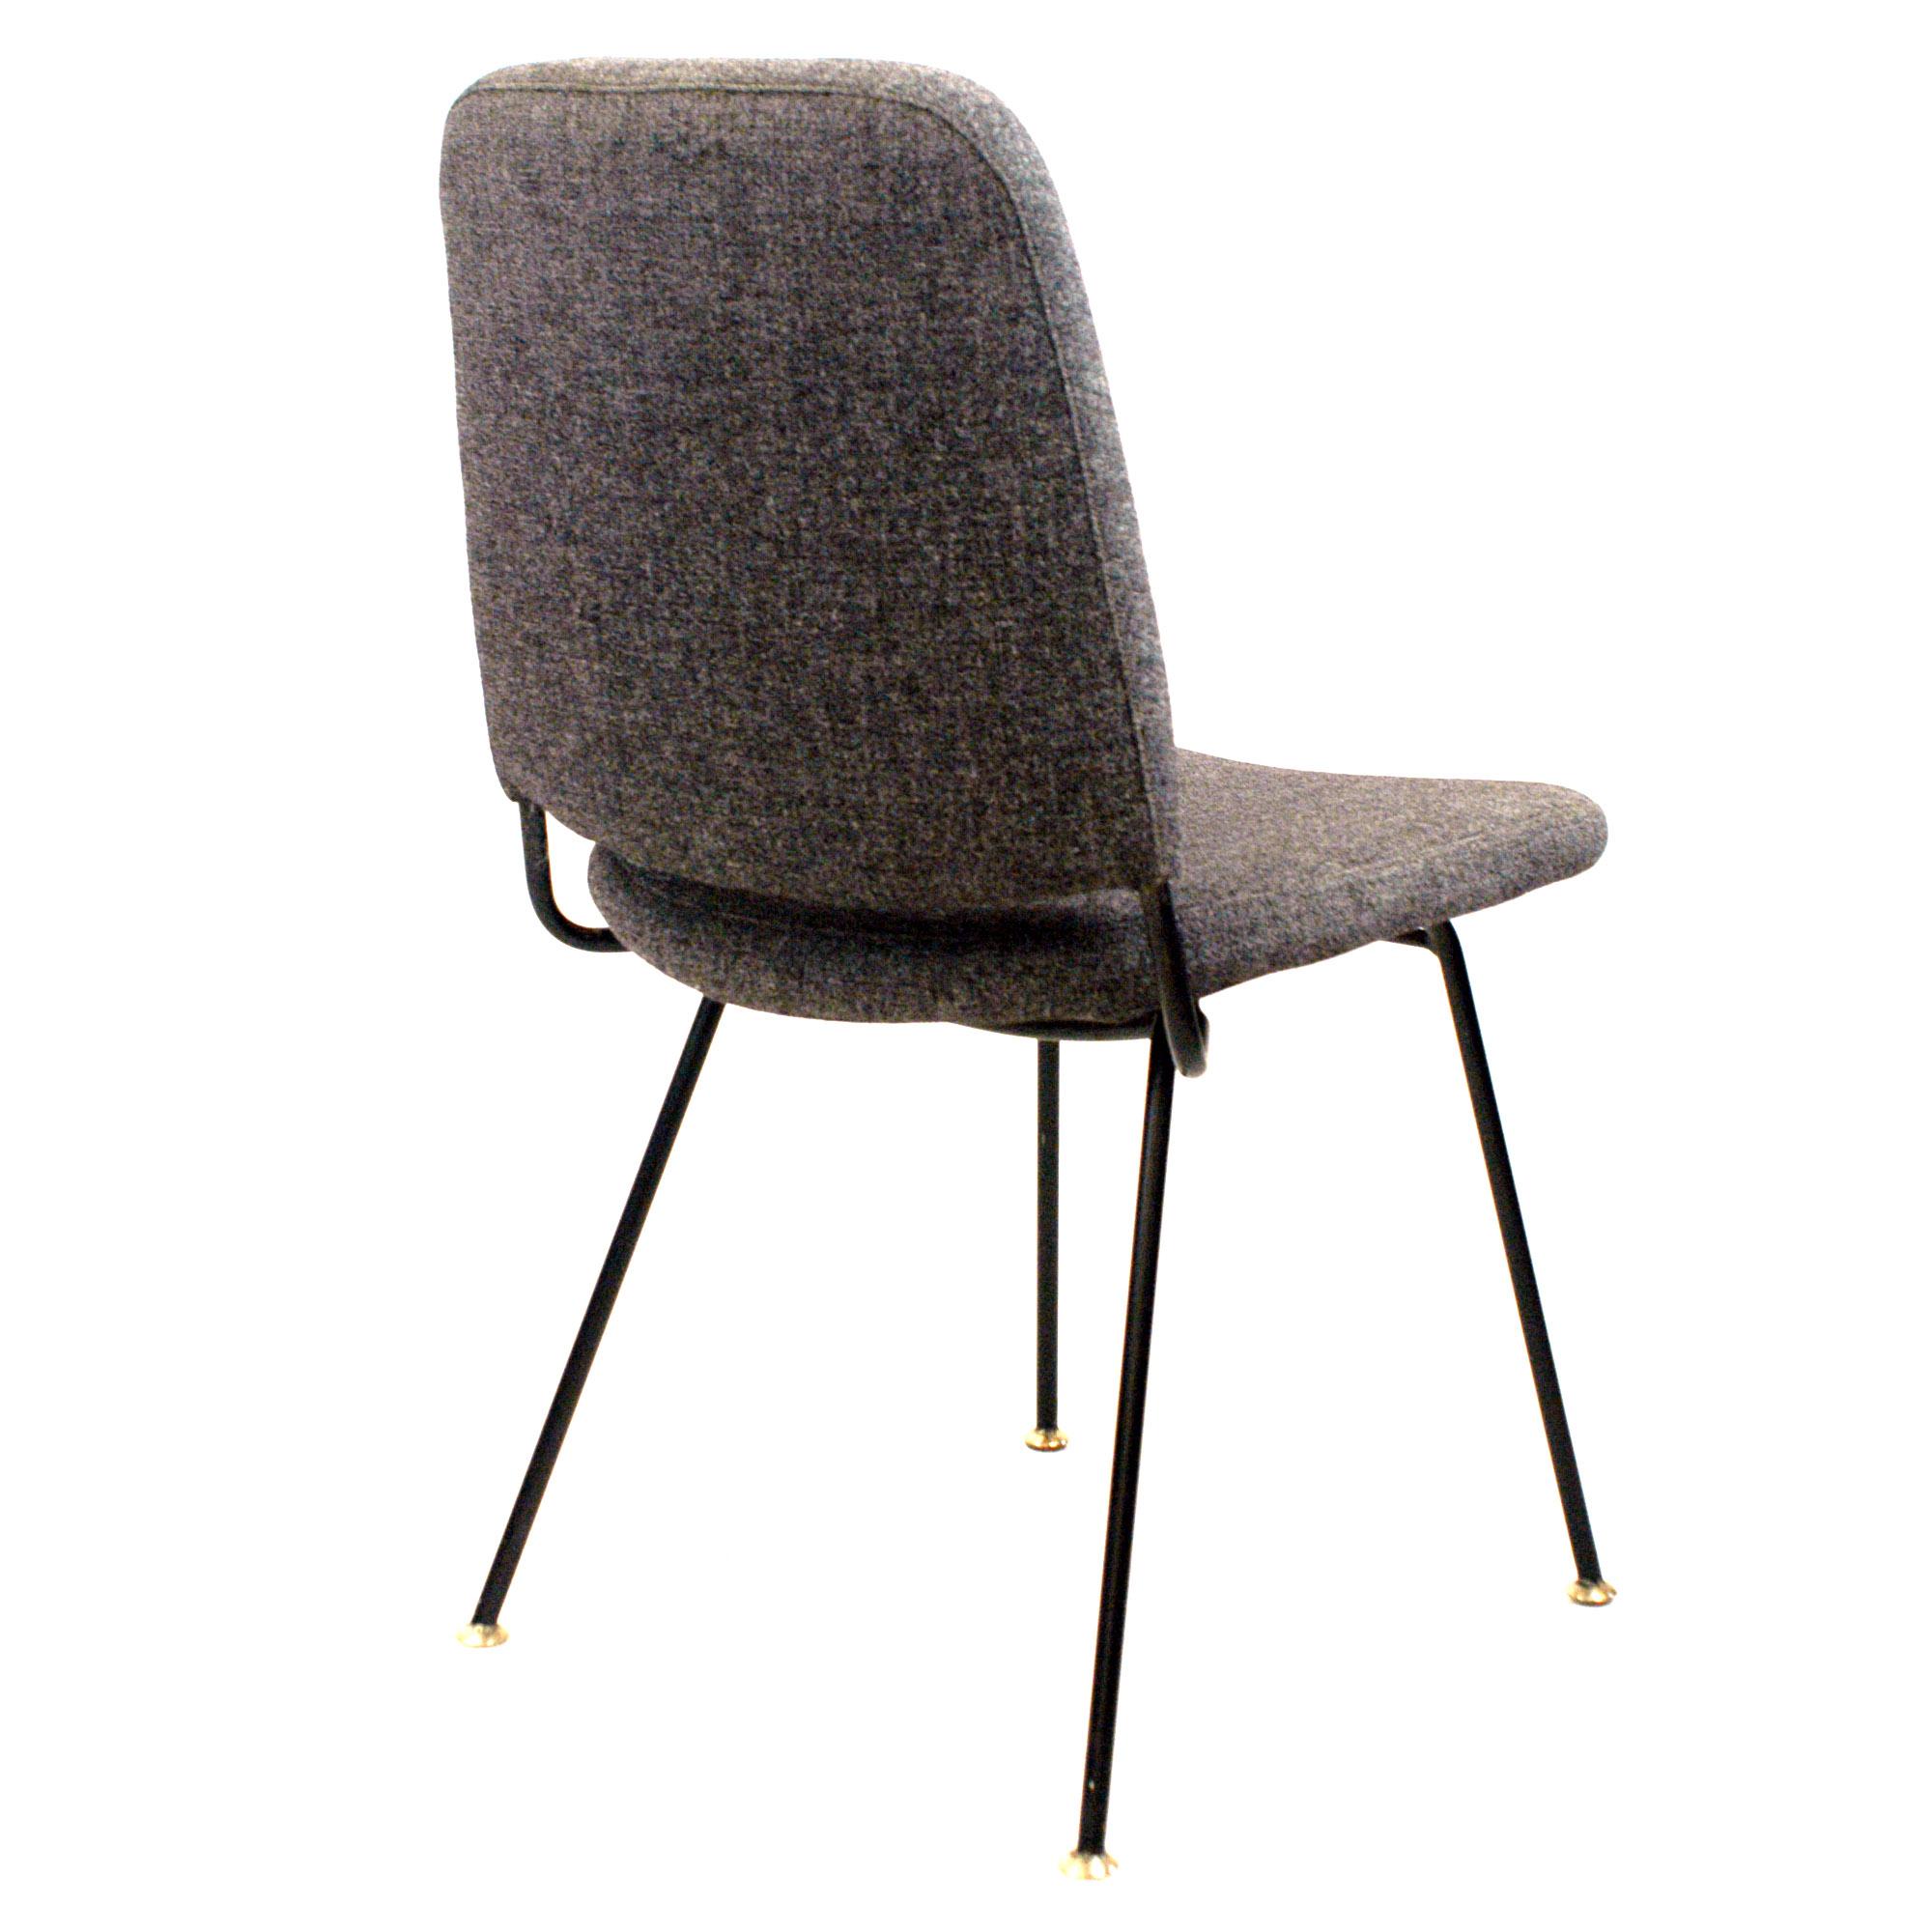 Mid-Century Modern Pair of Two Italian Midcentury Black Metal and Grey Wool Chairs by Arflex